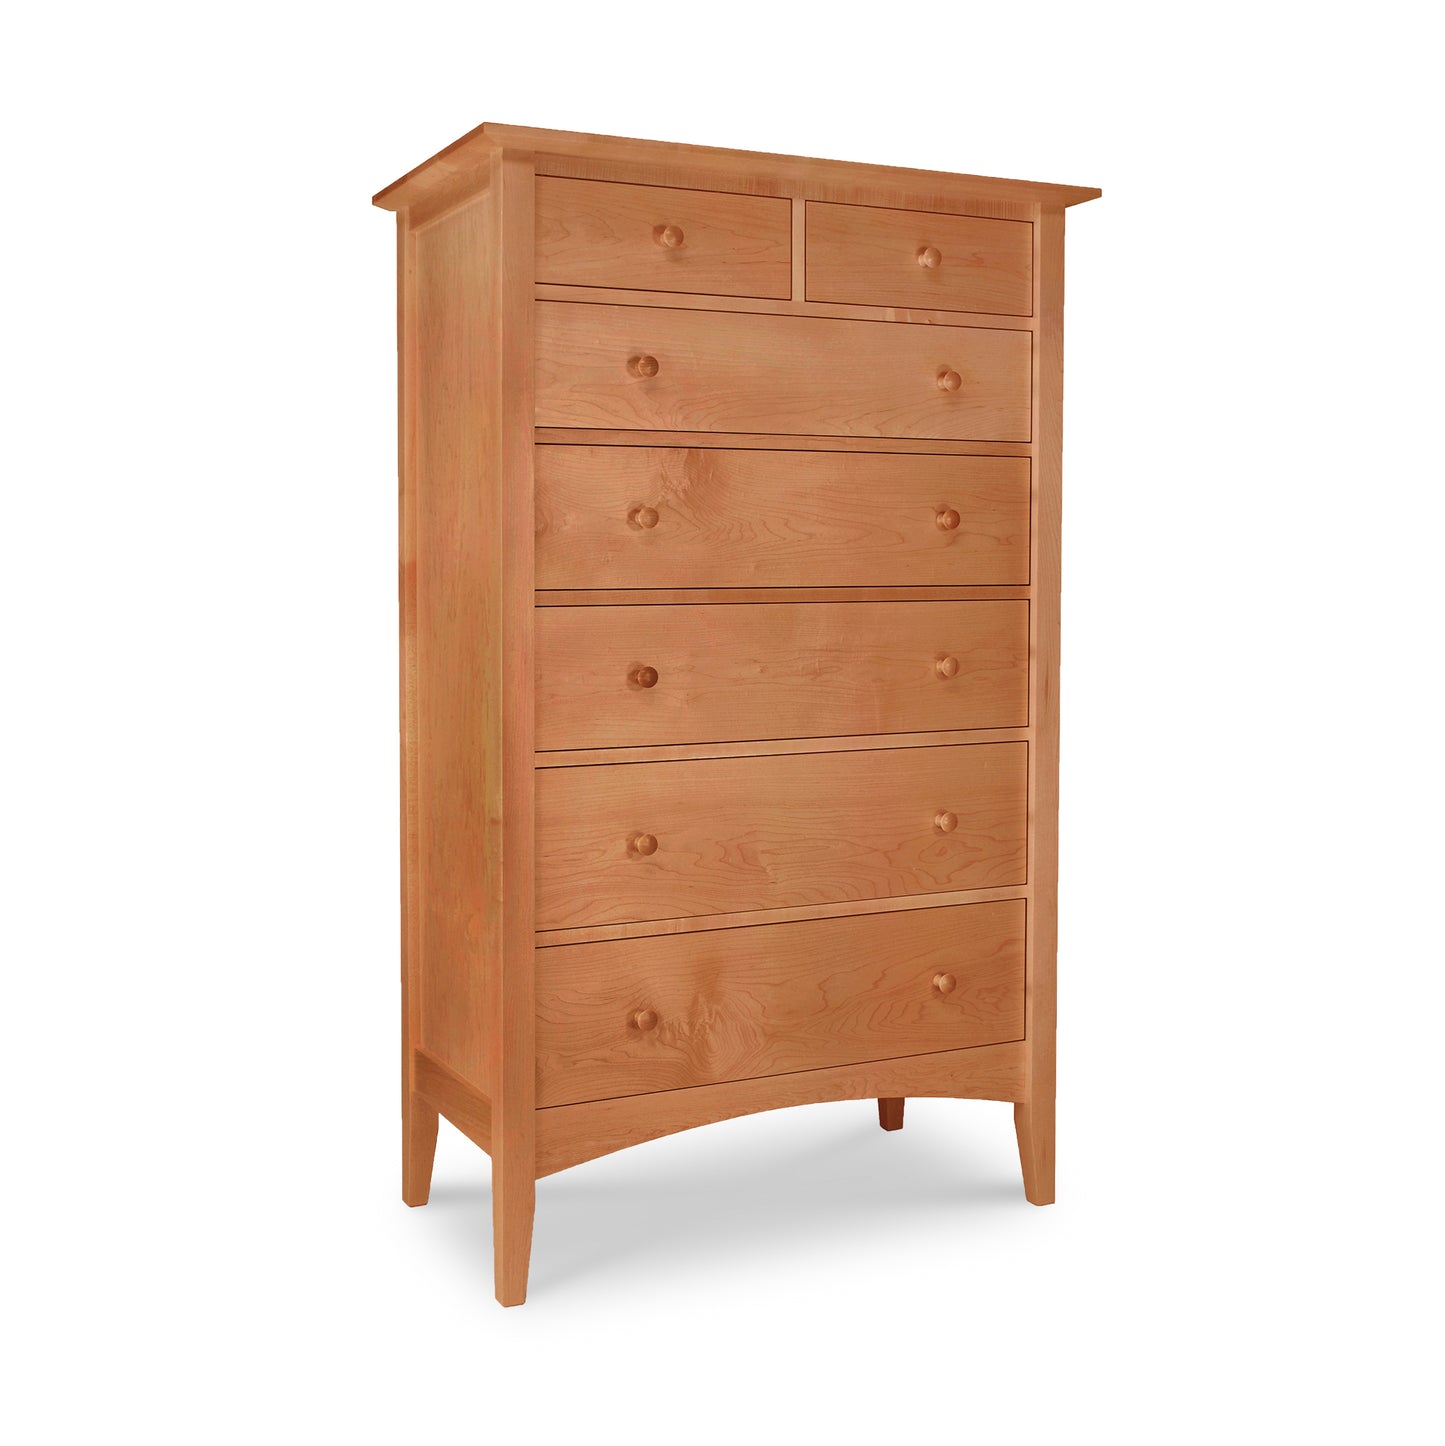 An American Shaker 7-Drawer Chest by Maple Corner Woodworks on a white background.